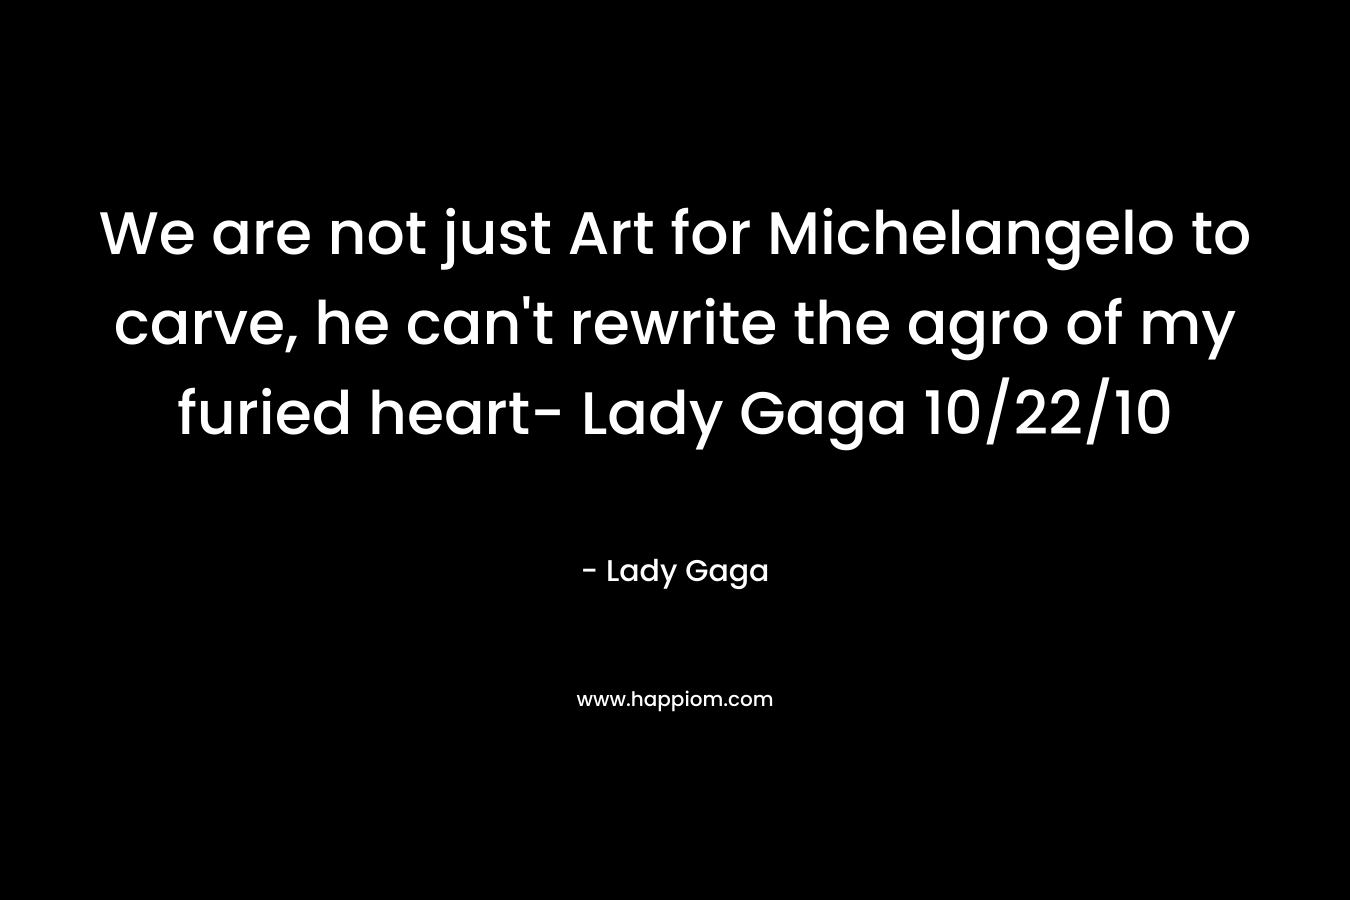 We are not just Art for Michelangelo to carve, he can't rewrite the agro of my furied heart- Lady Gaga 10/22/10